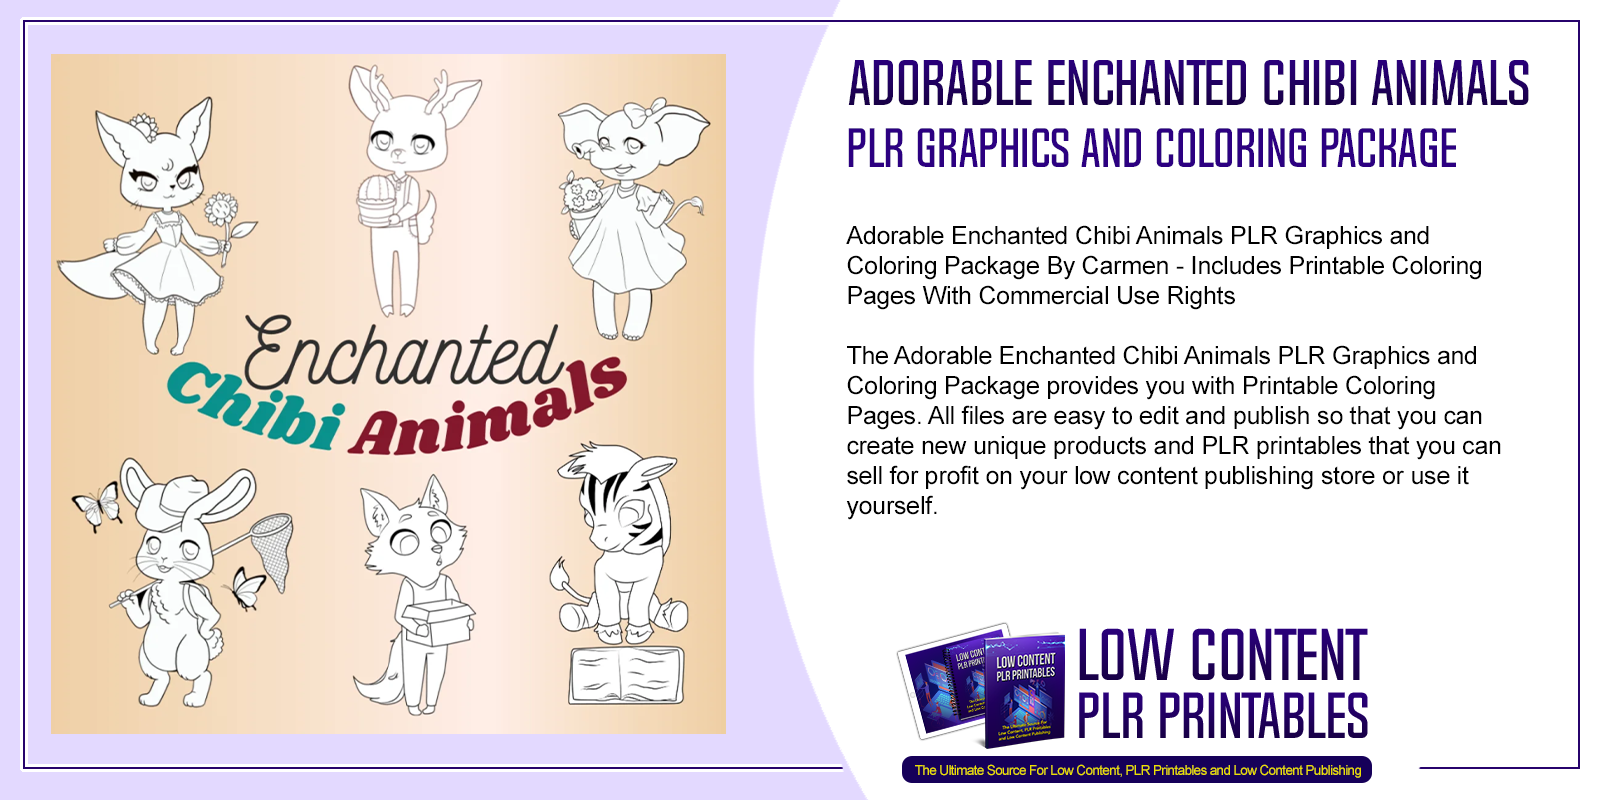 Adorable Enchanted Chibi Animals PLR Graphics and Coloring Package